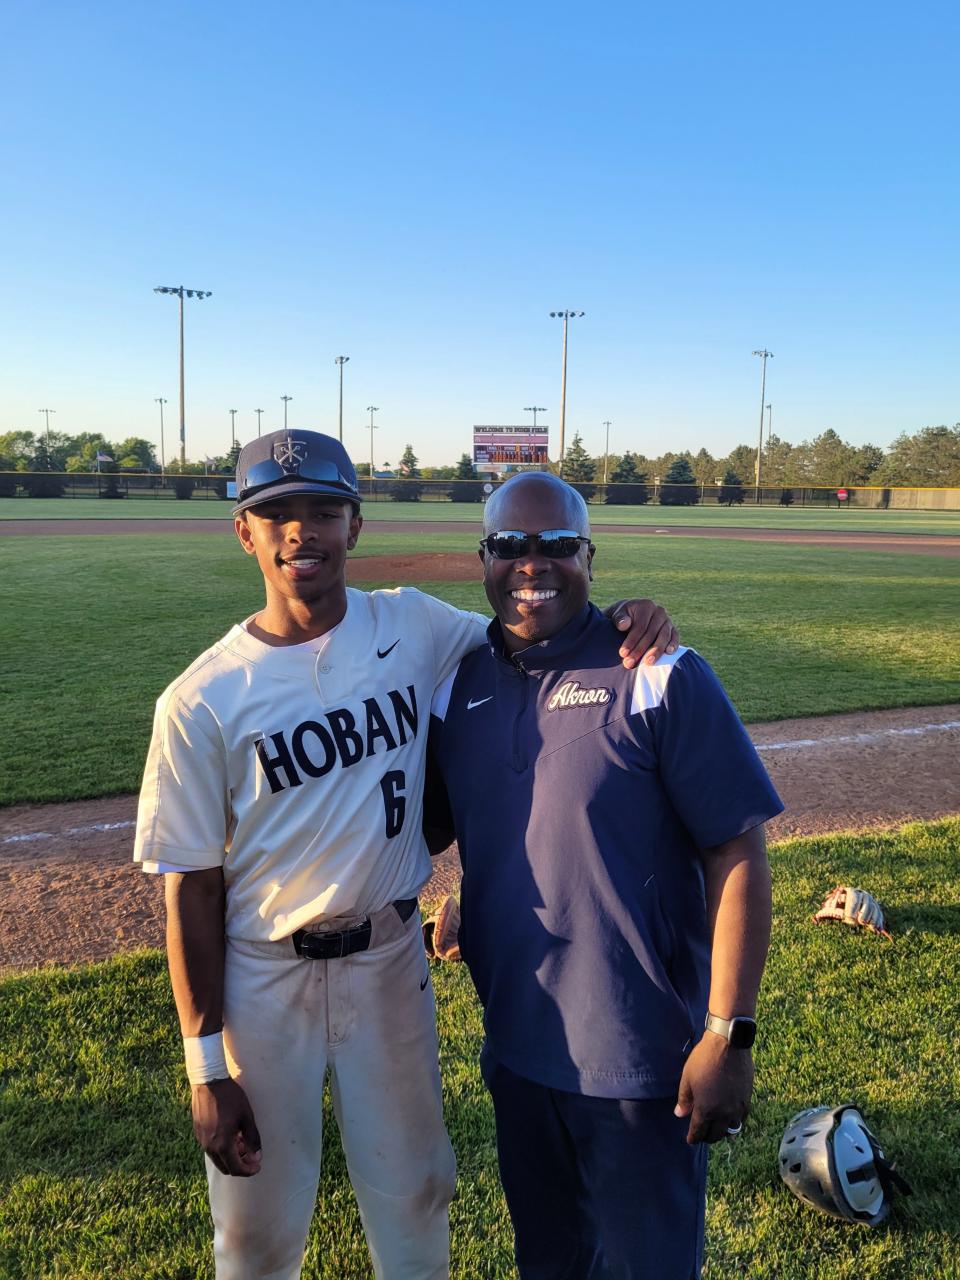 Archbishop Hoban sophomore Masud Jennings, left, and his father, Markus Jennings, right, smile after the Knights won a Division II baseball regional championship. Markus Jennings is a 1988 Buchtel High School graduate who helped the Griffins win a Division II football state championship in 1987.